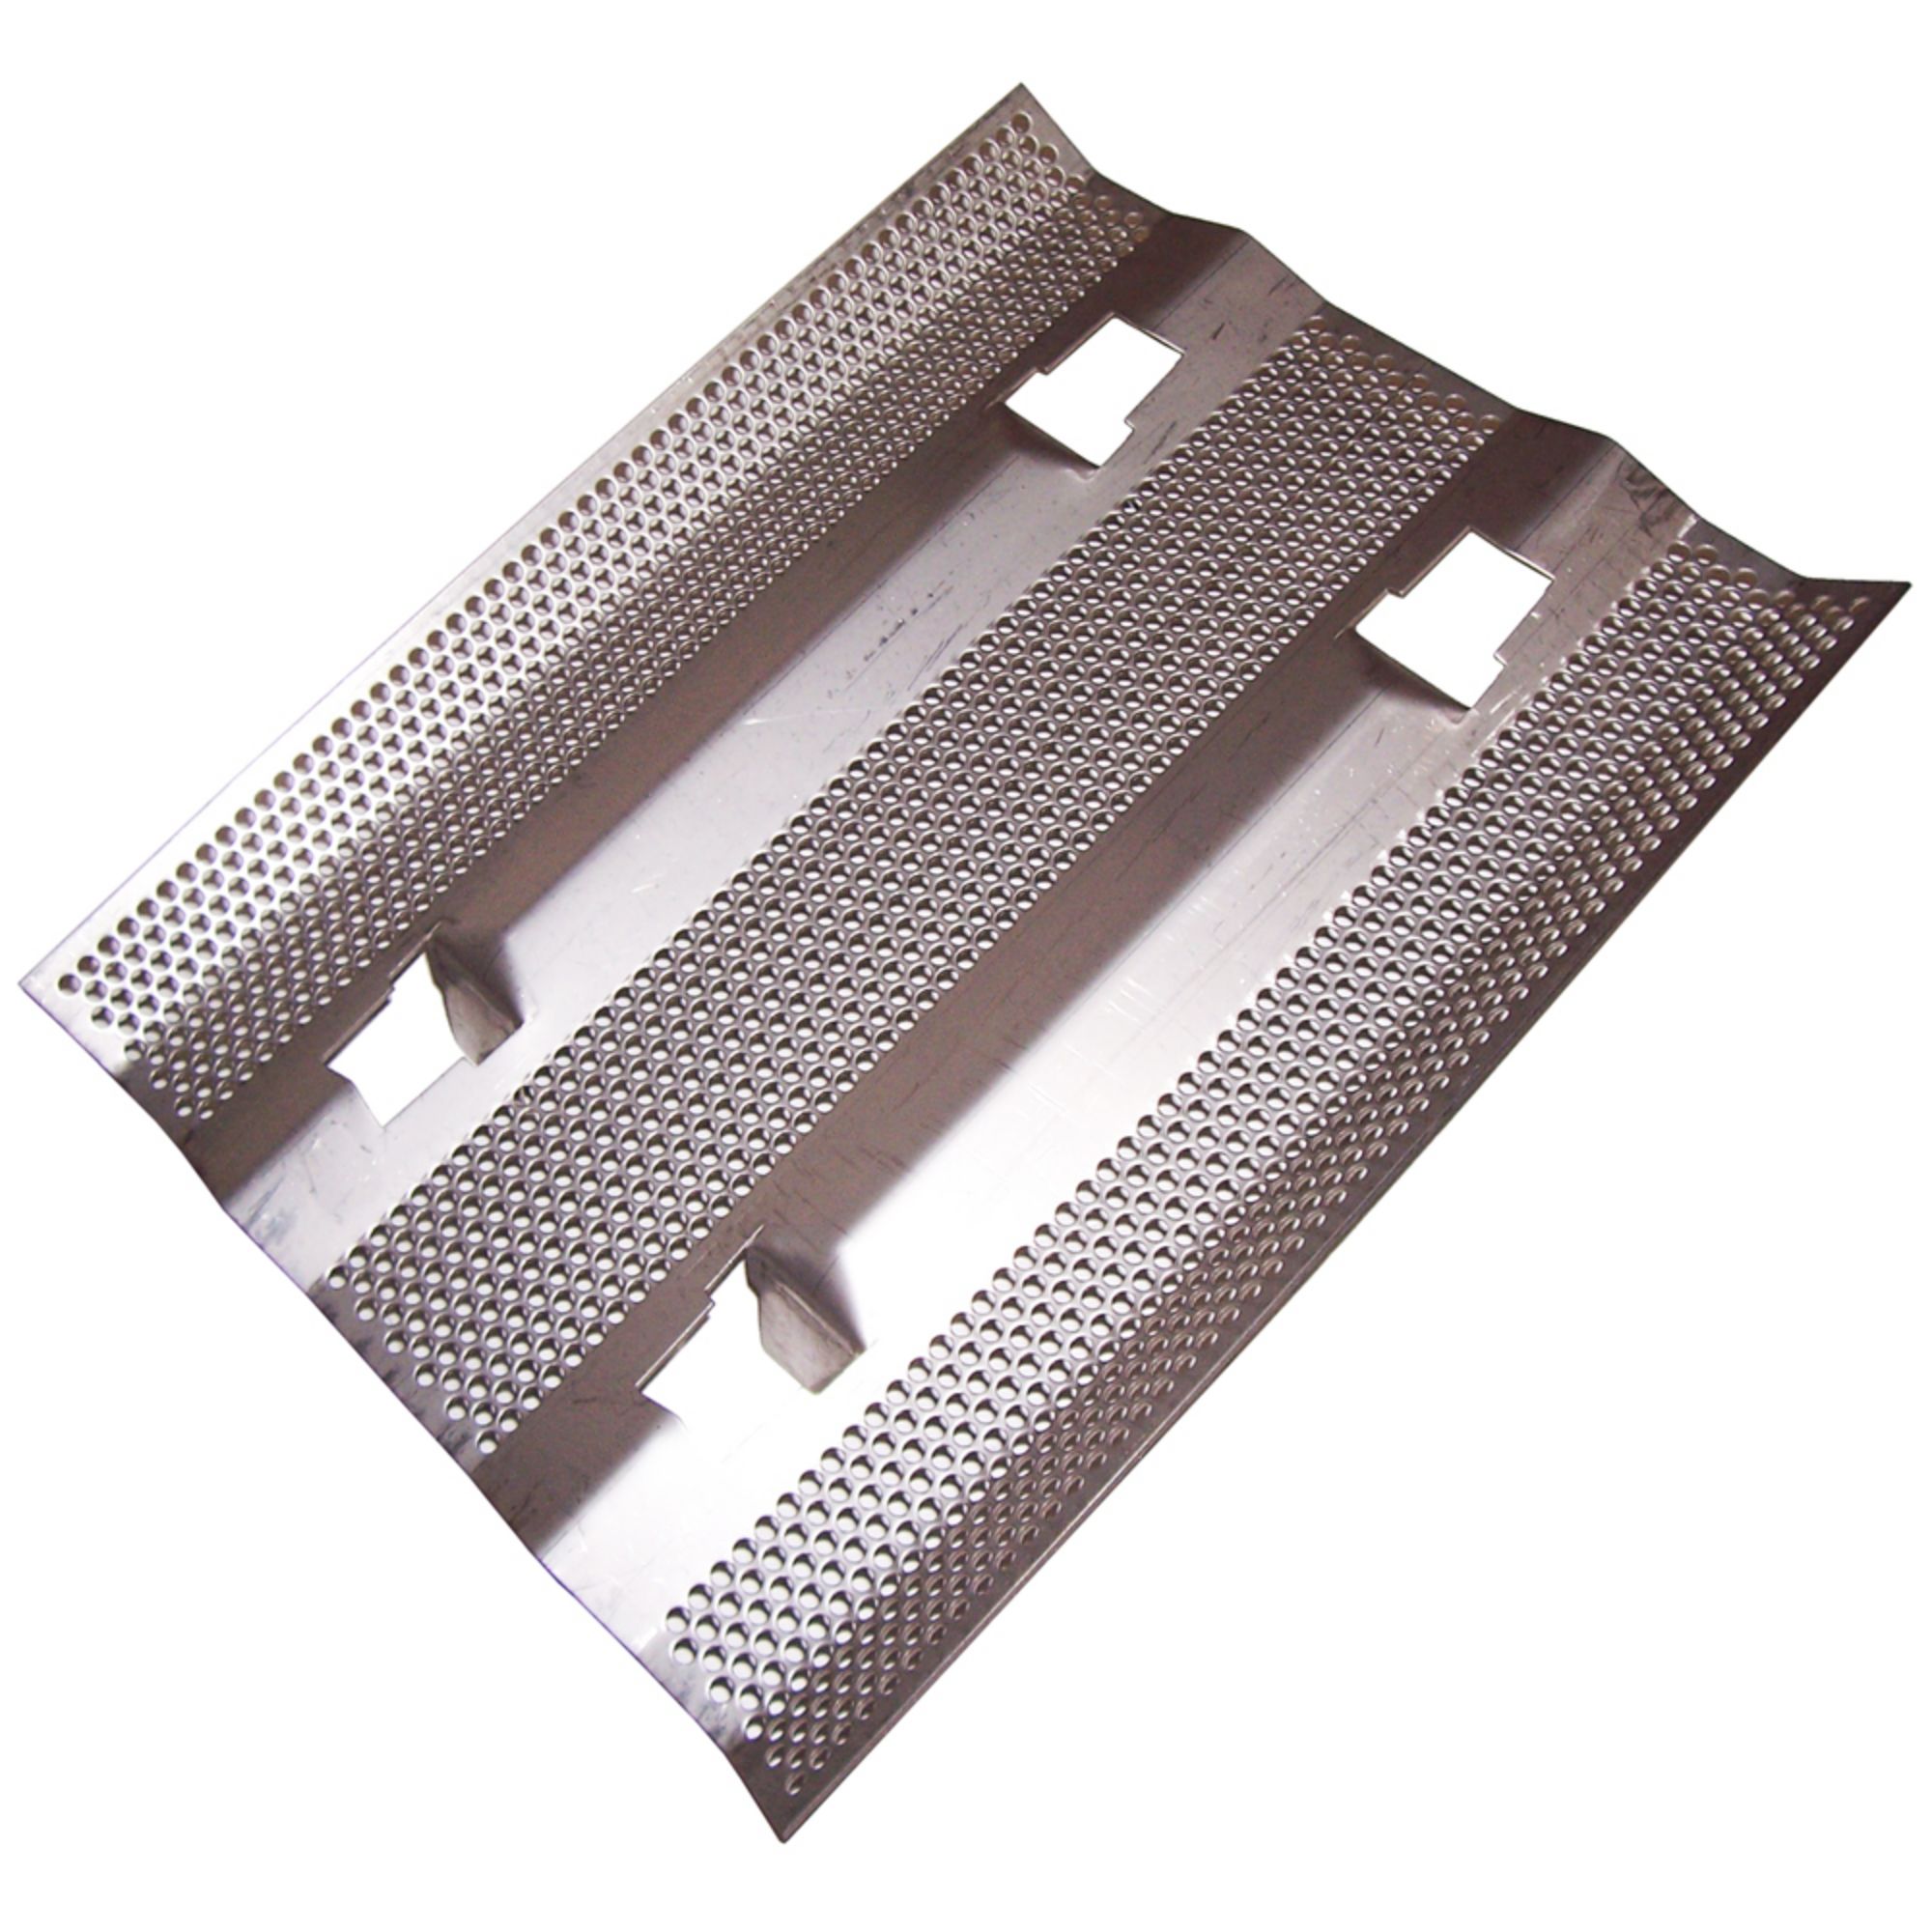 Stainless steel heat plate for Fire Magic brand gas grills